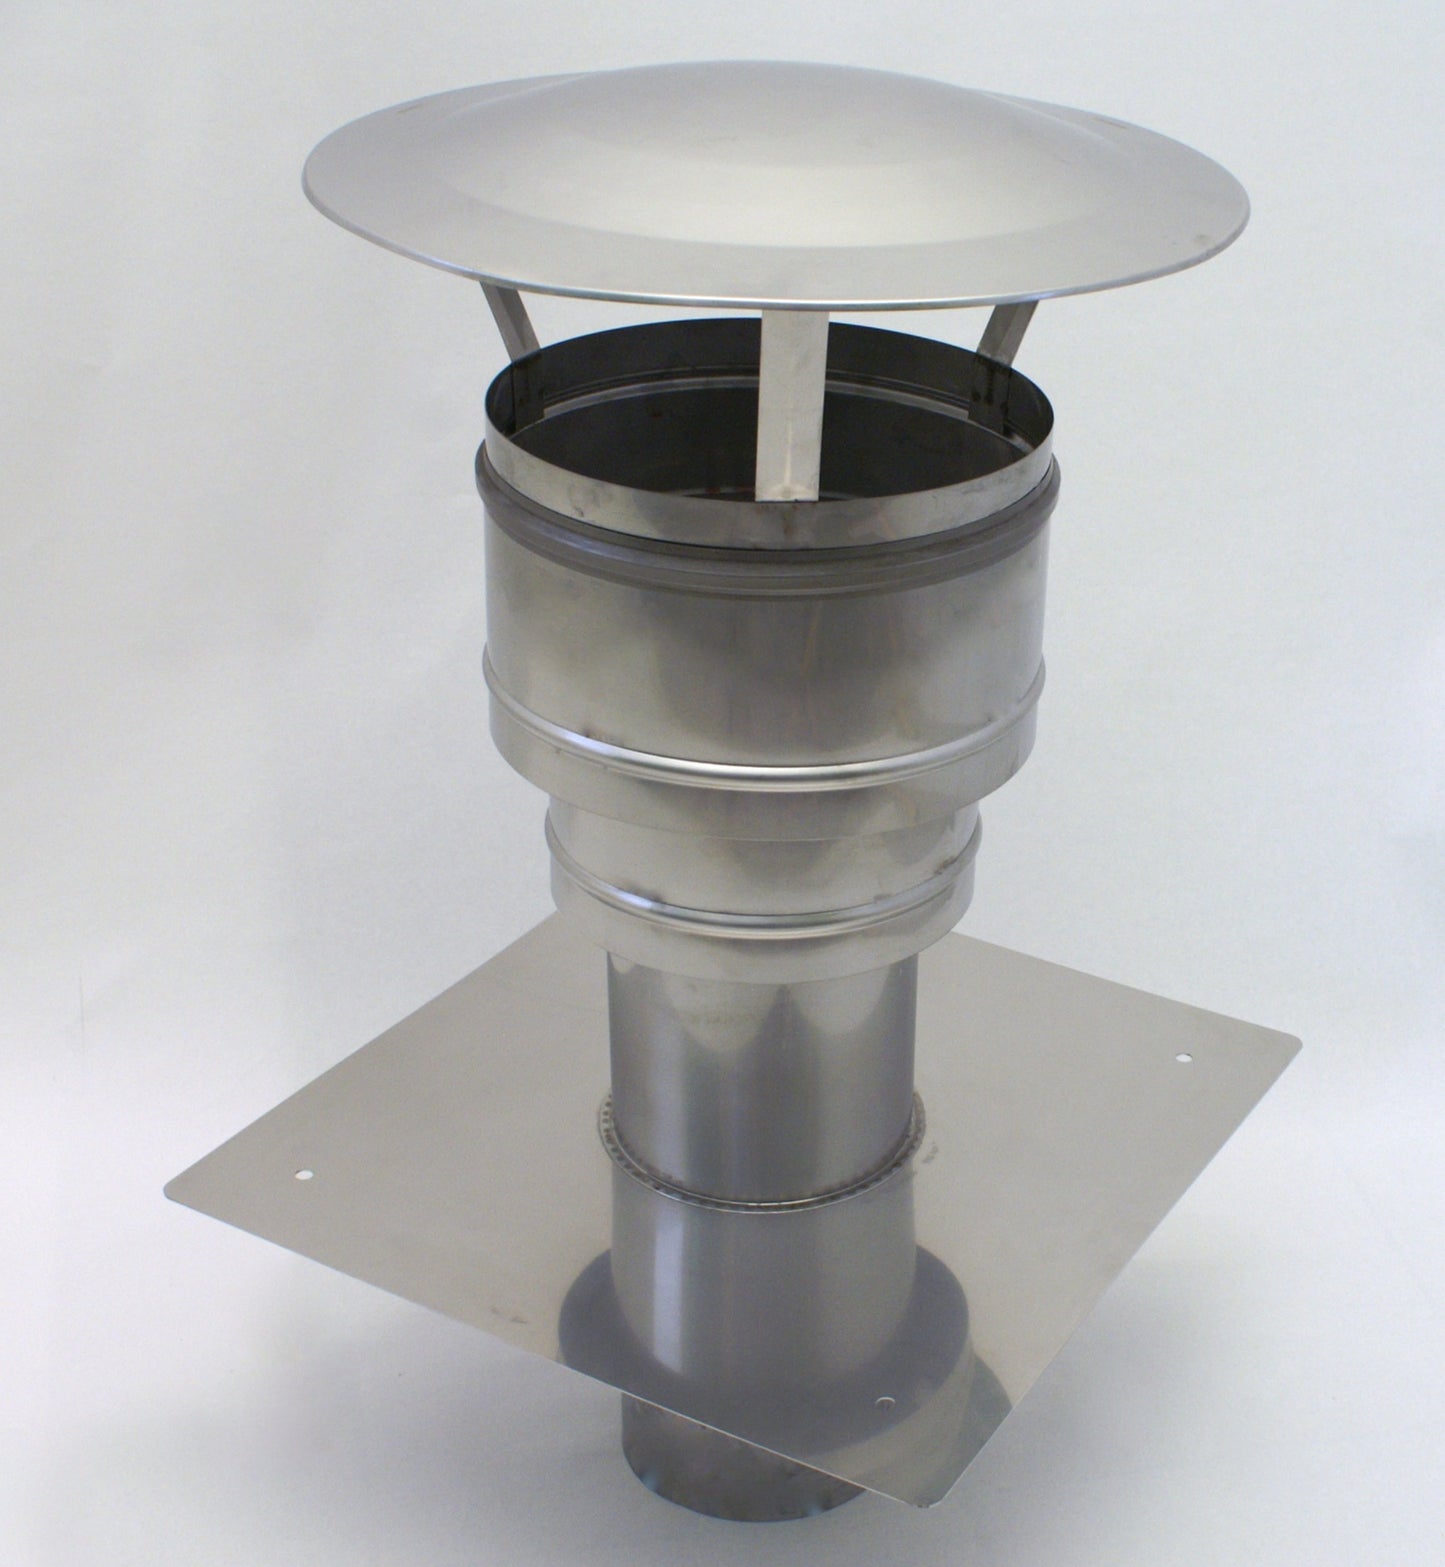 Chimney attachment with wind rings, chimney riser in various sizes